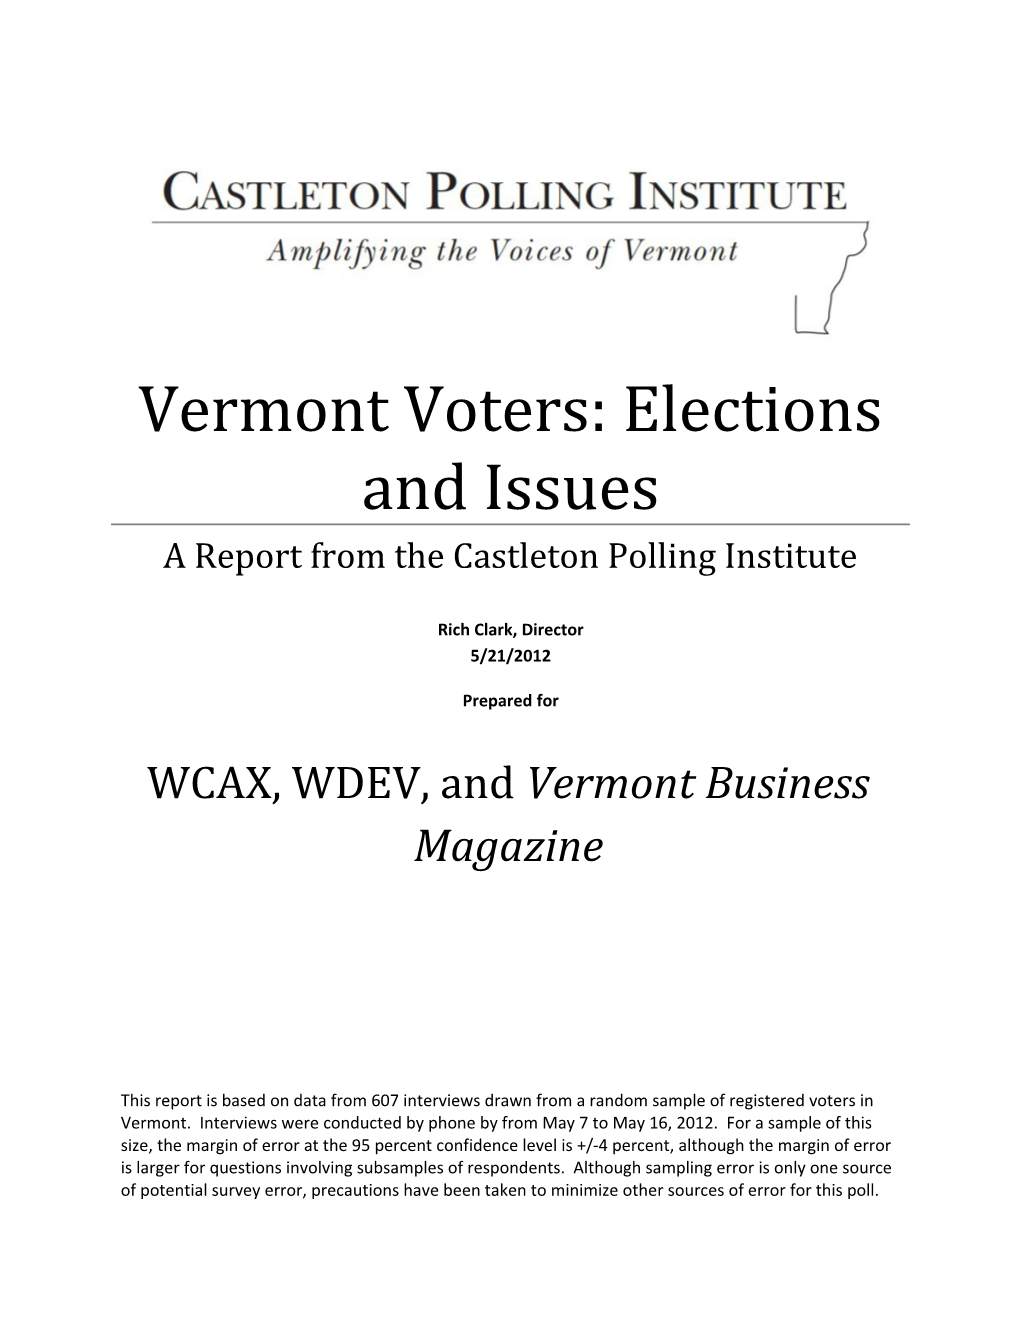 WCAX, WDEV, and Vermont Business Magazine